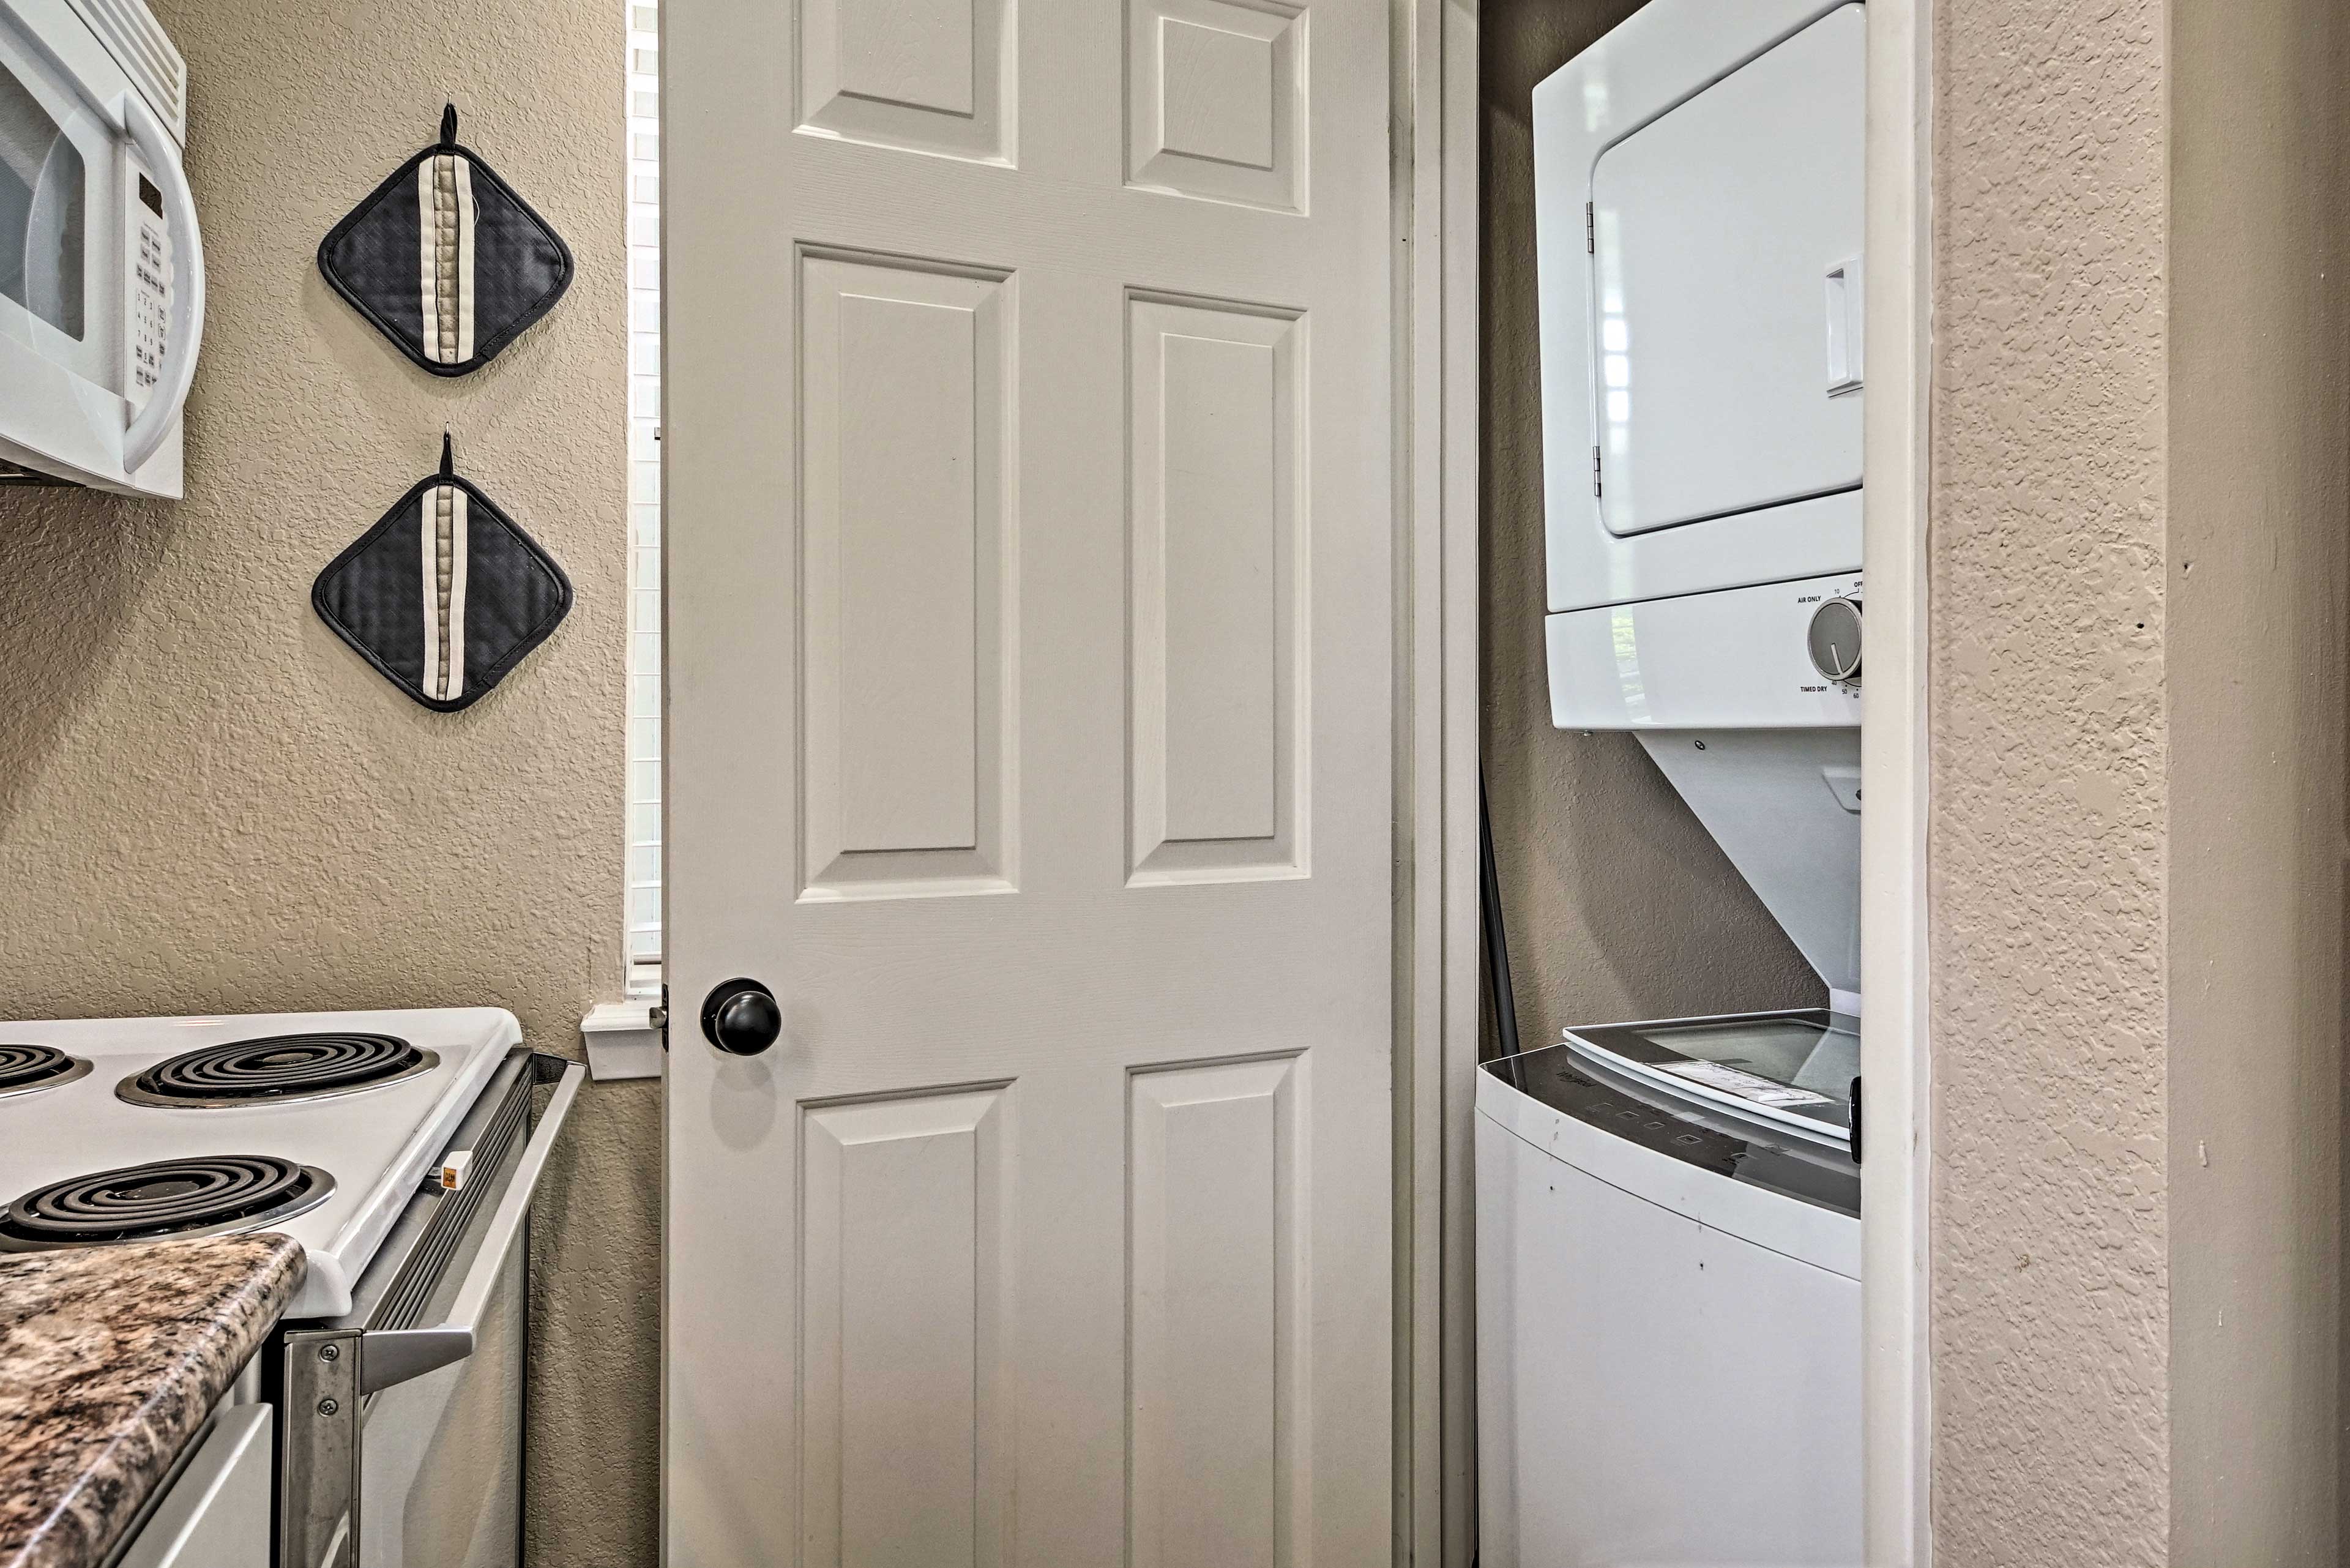 Kitchen | Washer/Dryer | Linens/Towels Provided